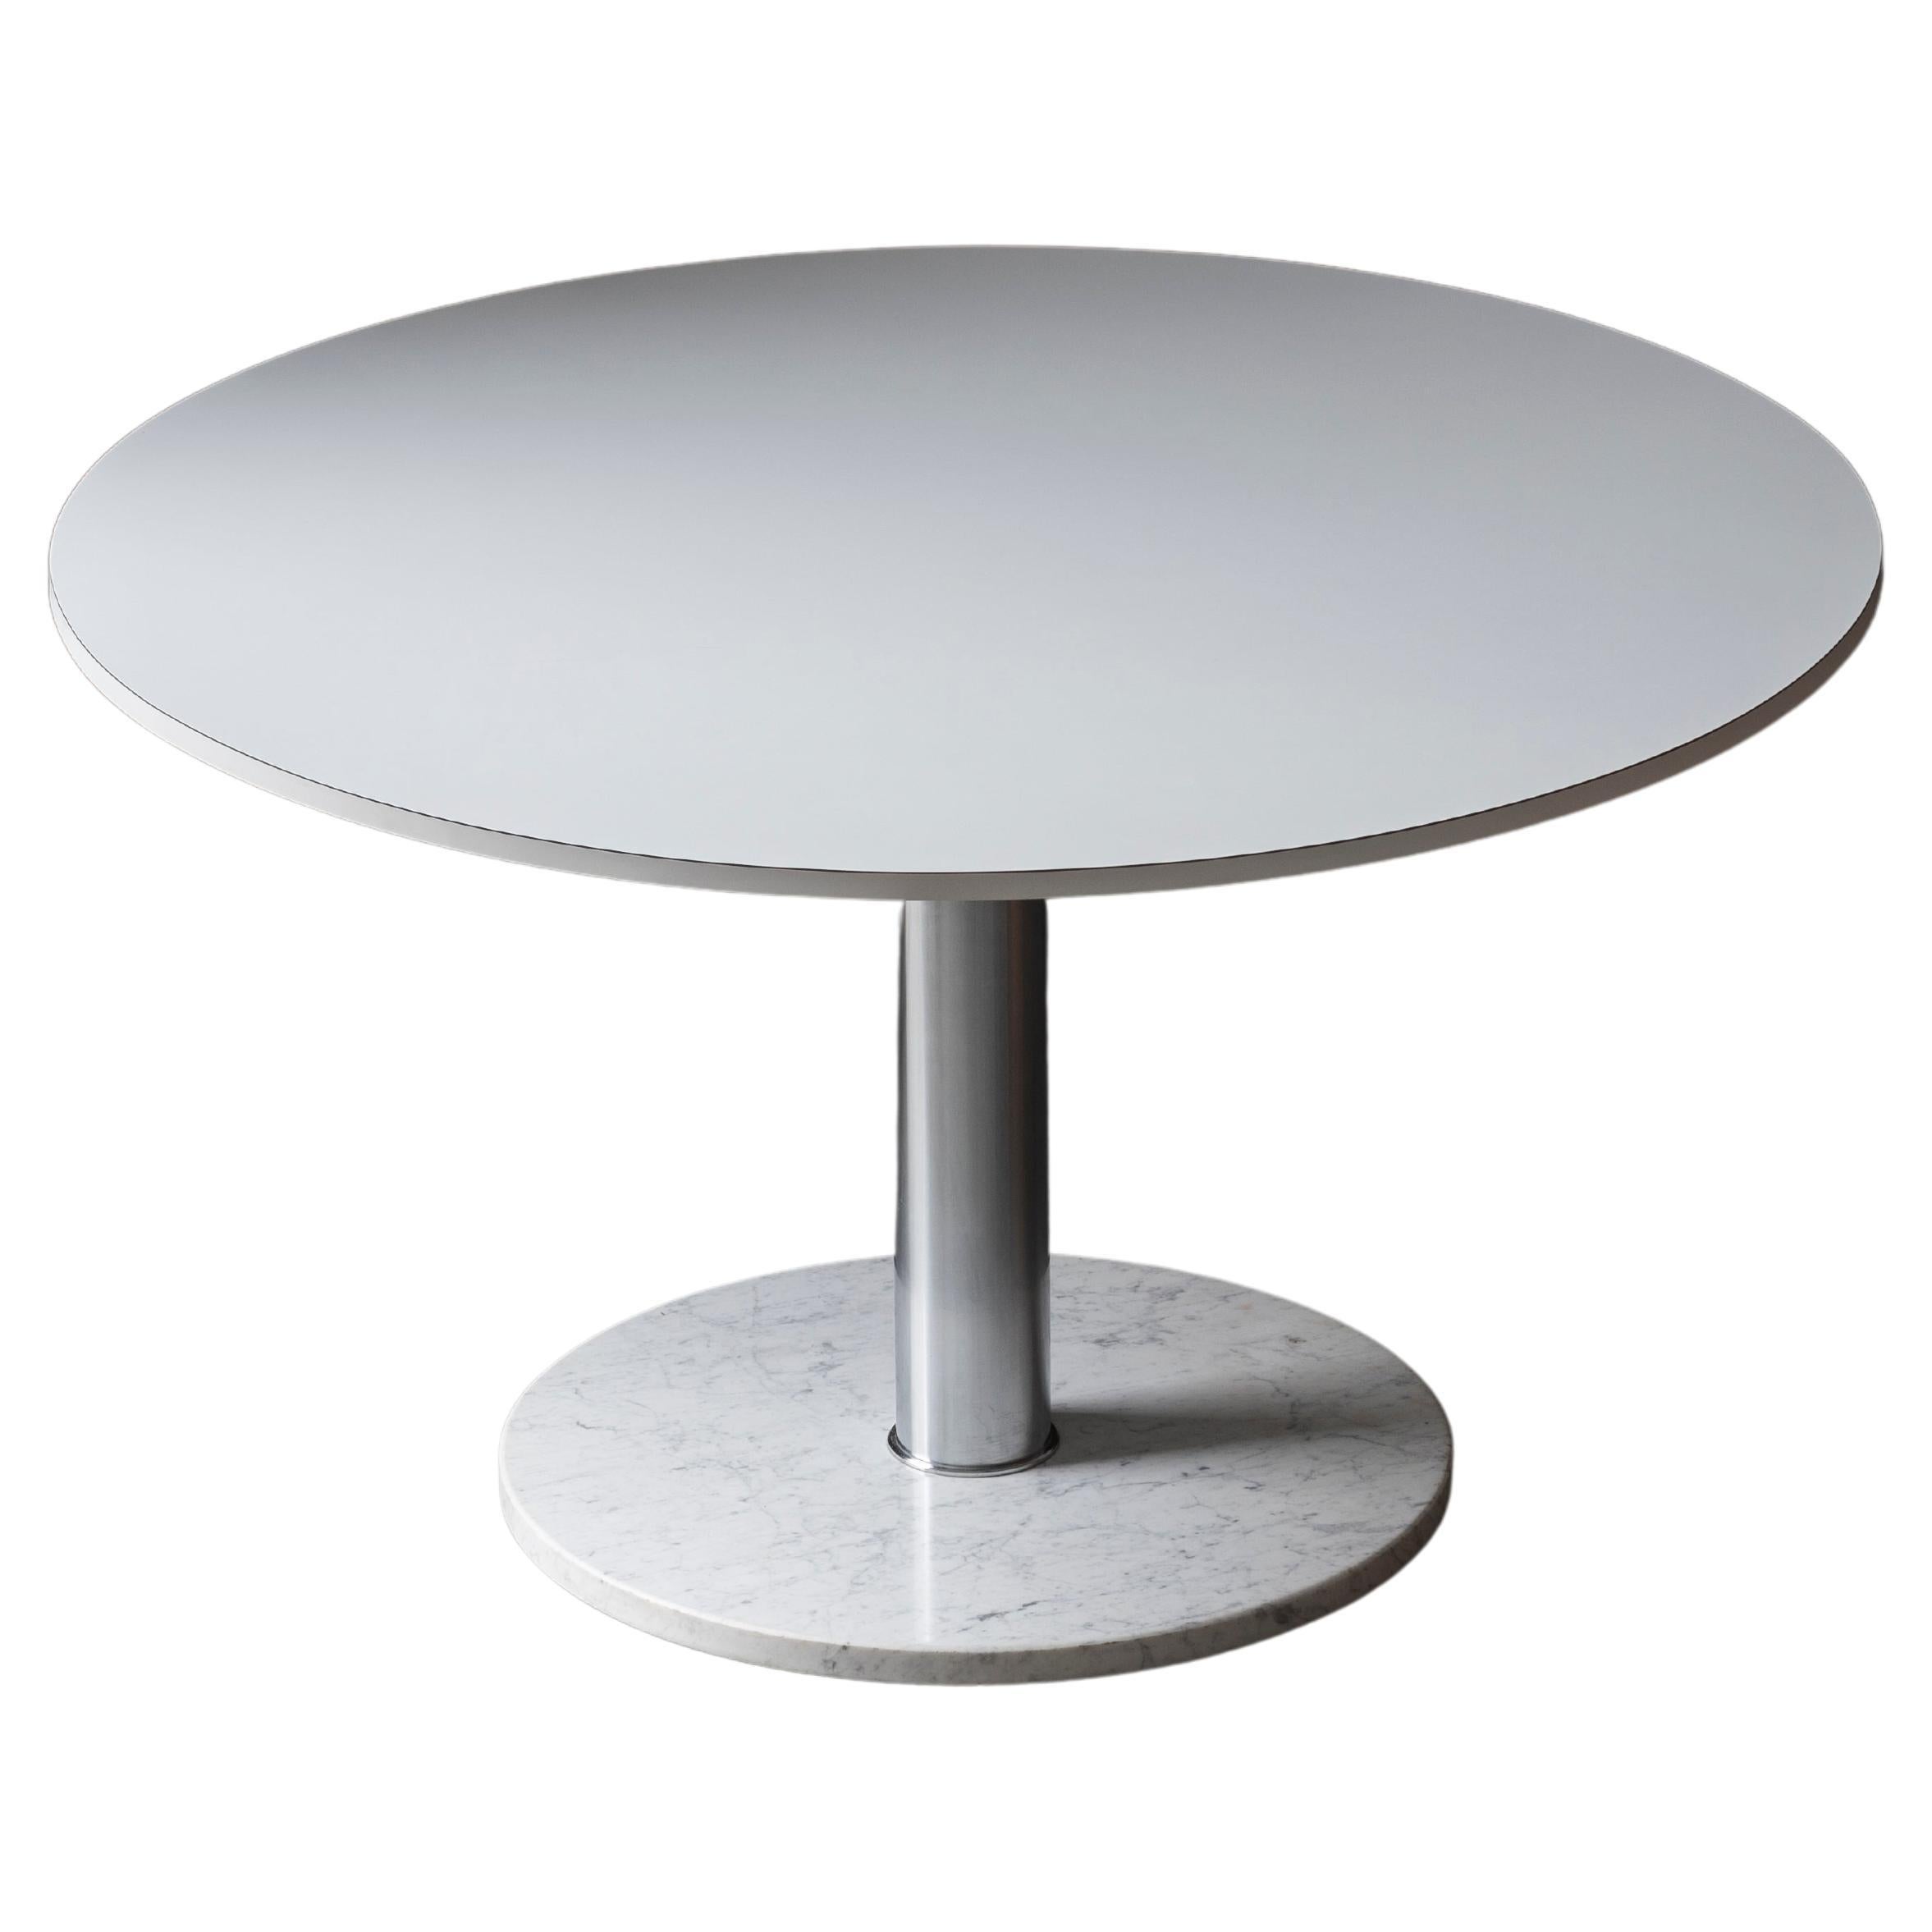 Alfred Hendrickx Dining Table with Marble Foot for Belform, Belgian design, '60s For Sale